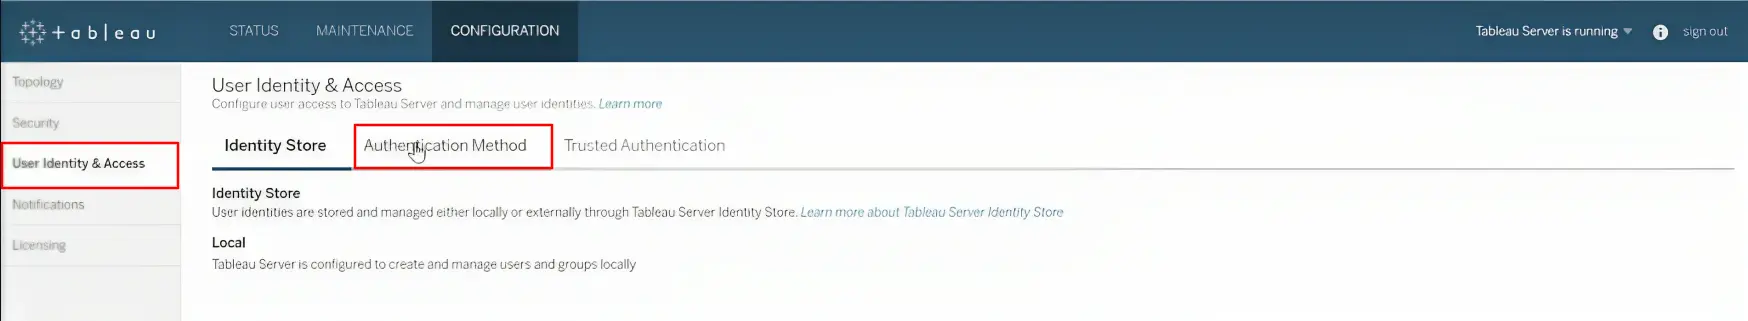 Tableau Server SSO (Single Sign-On): Click Configuration and select User Identity & Access then Authentication Method